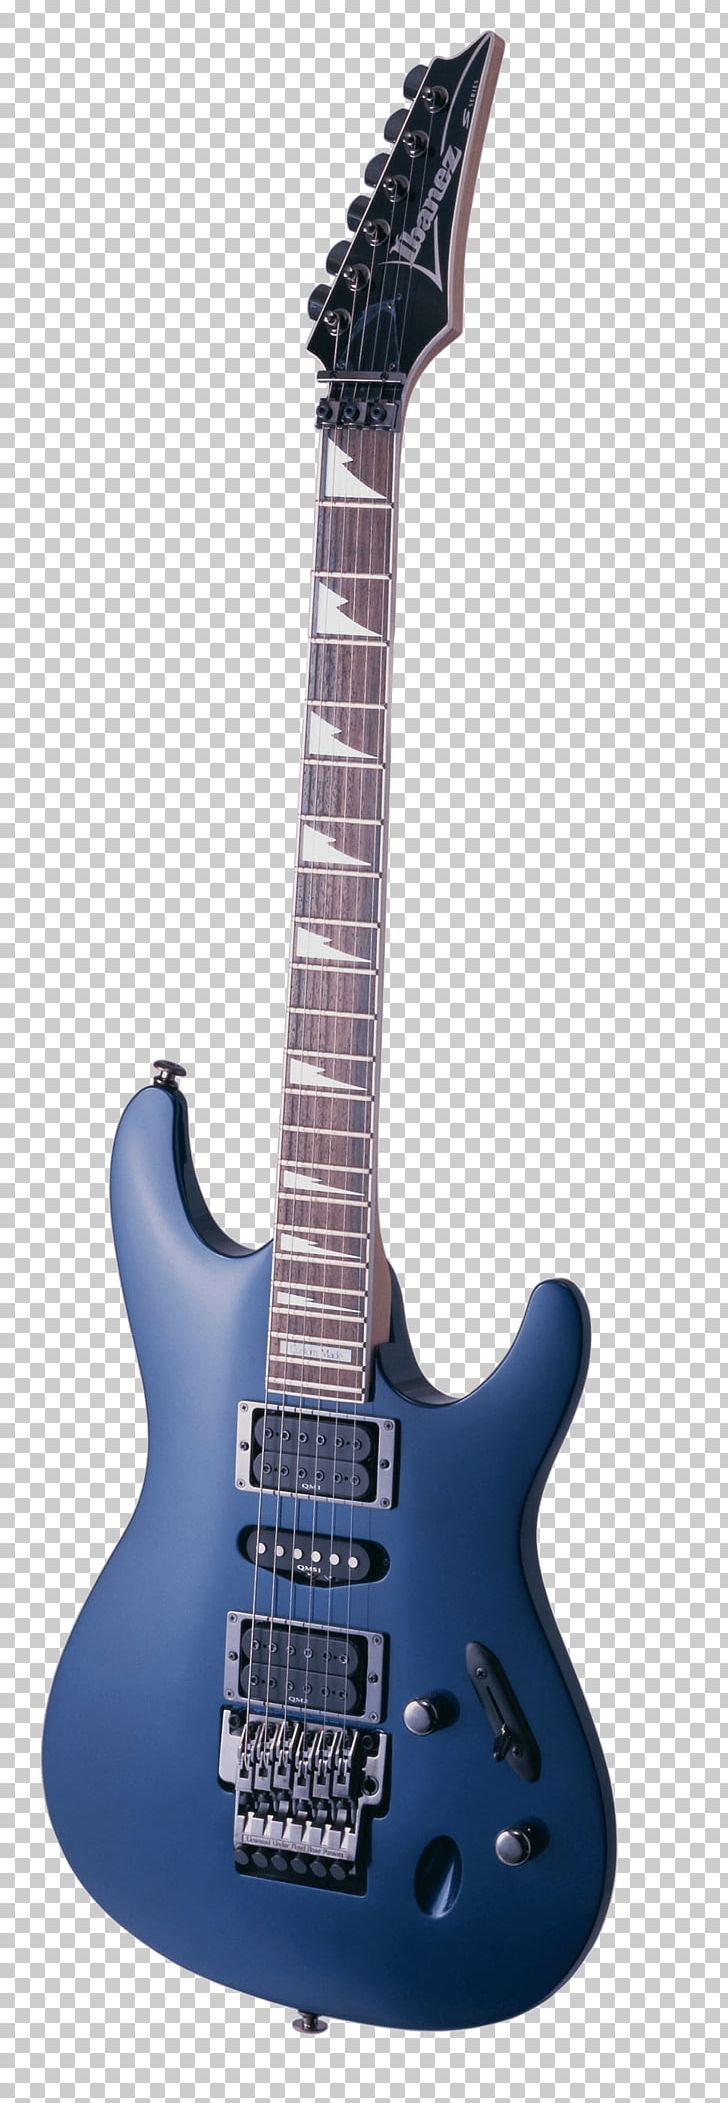 Ibanez Guitar PNG, Clipart, Guitar, Music, Objects Free PNG Download